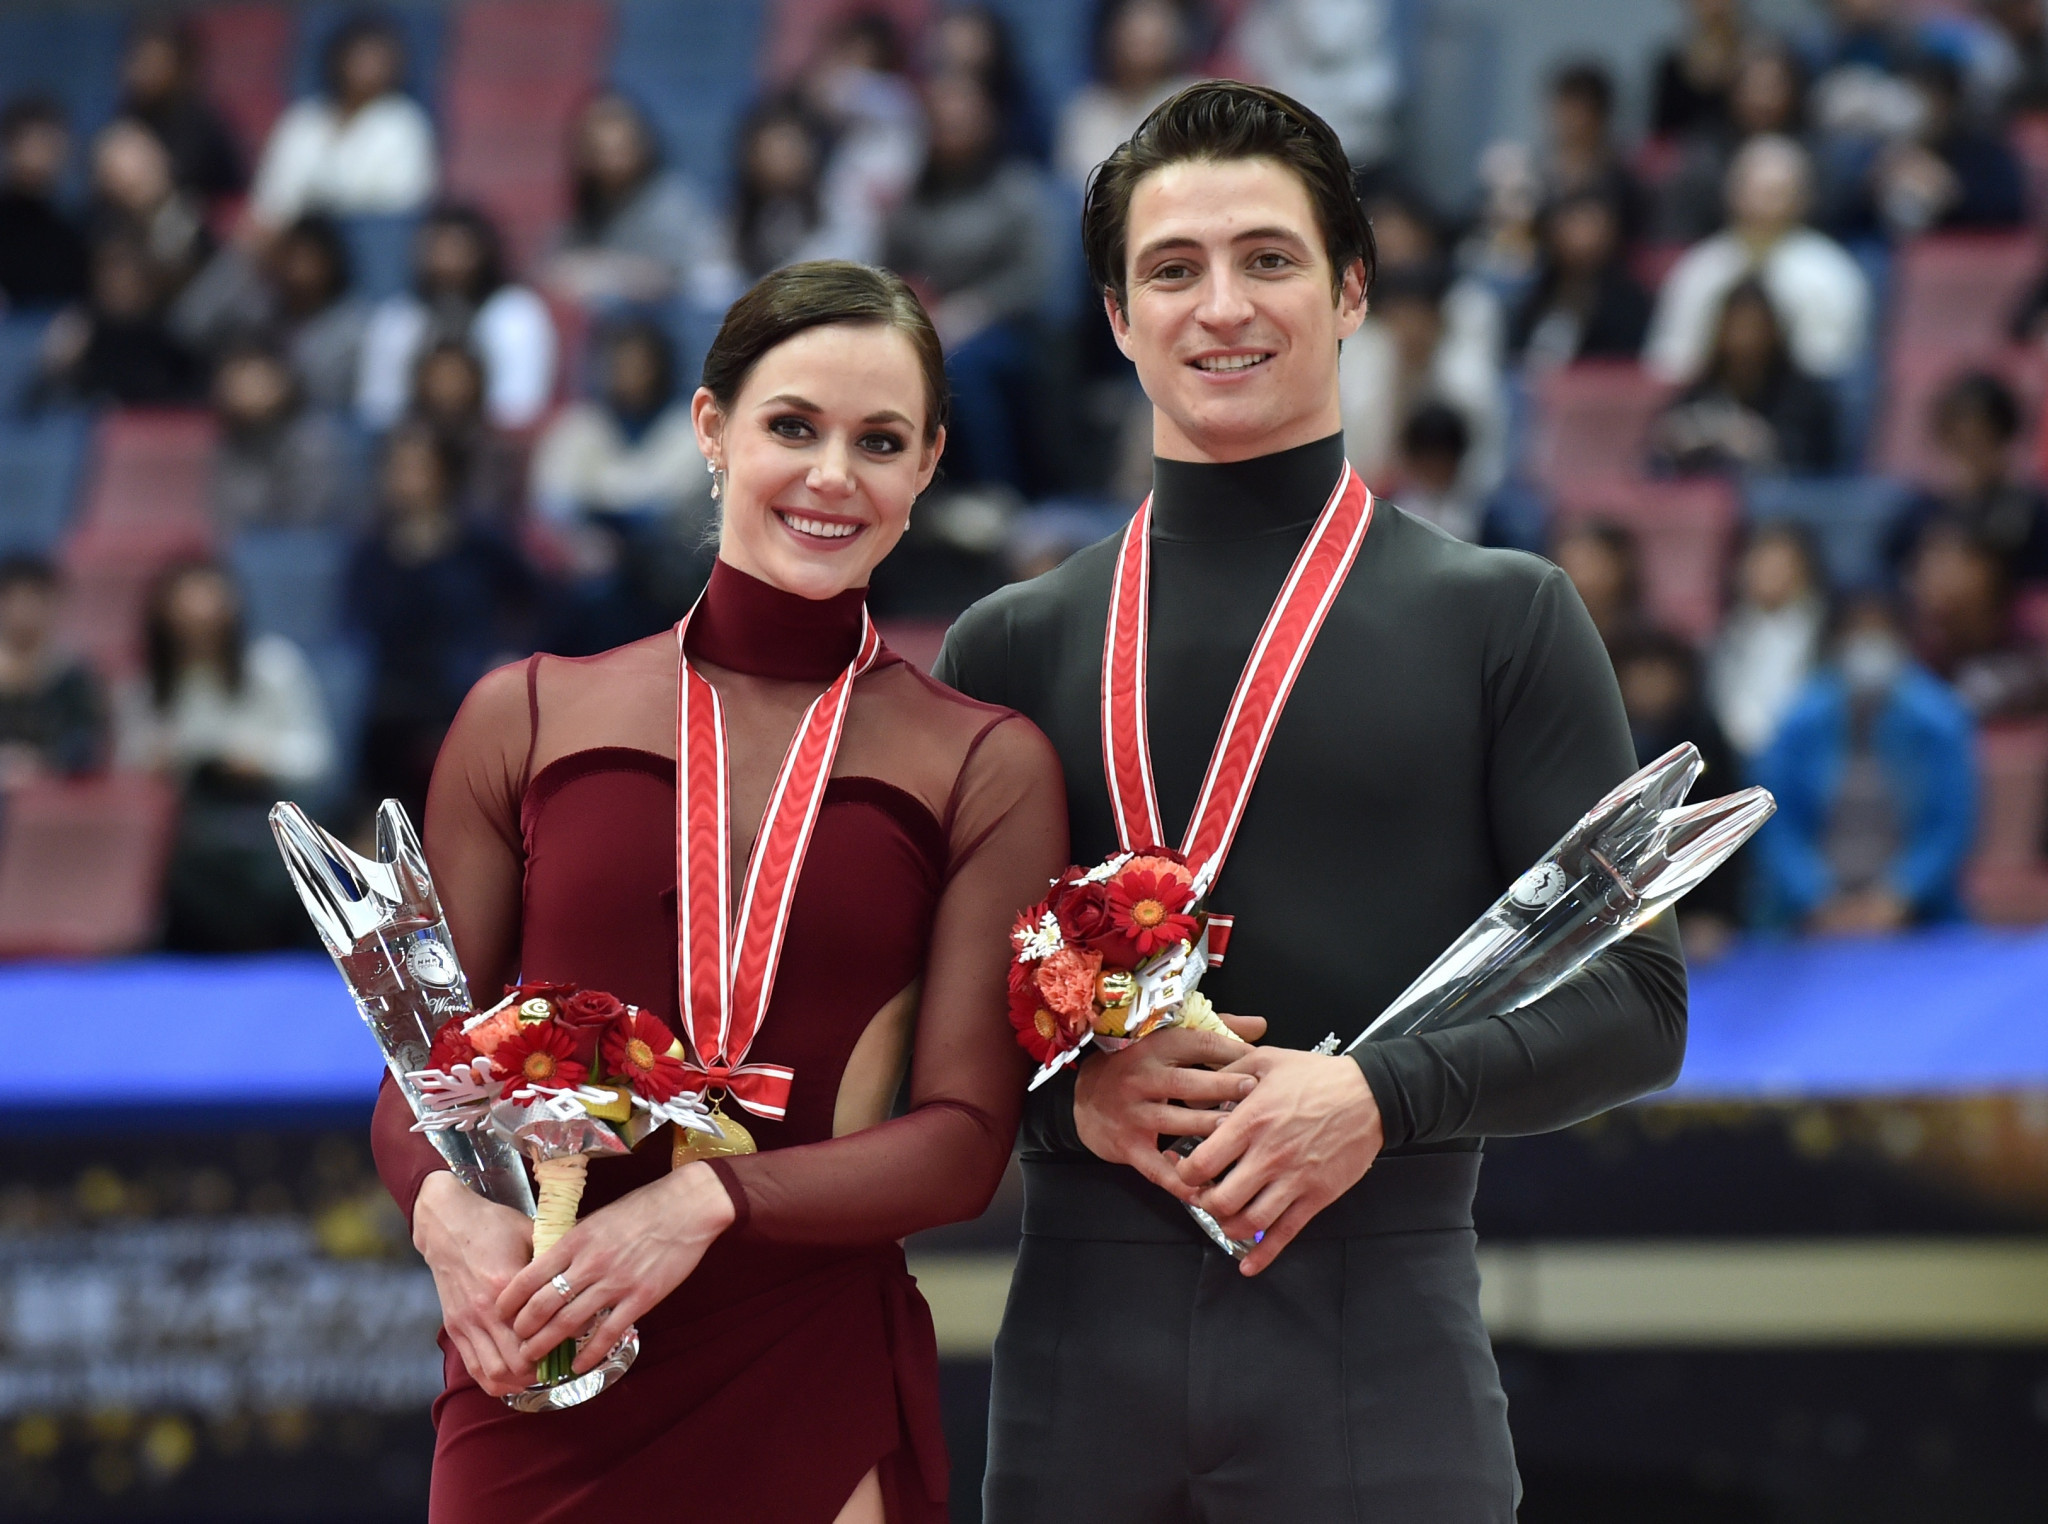 World Champions Strike Gold At Nhk Ice Dance Event In Japan